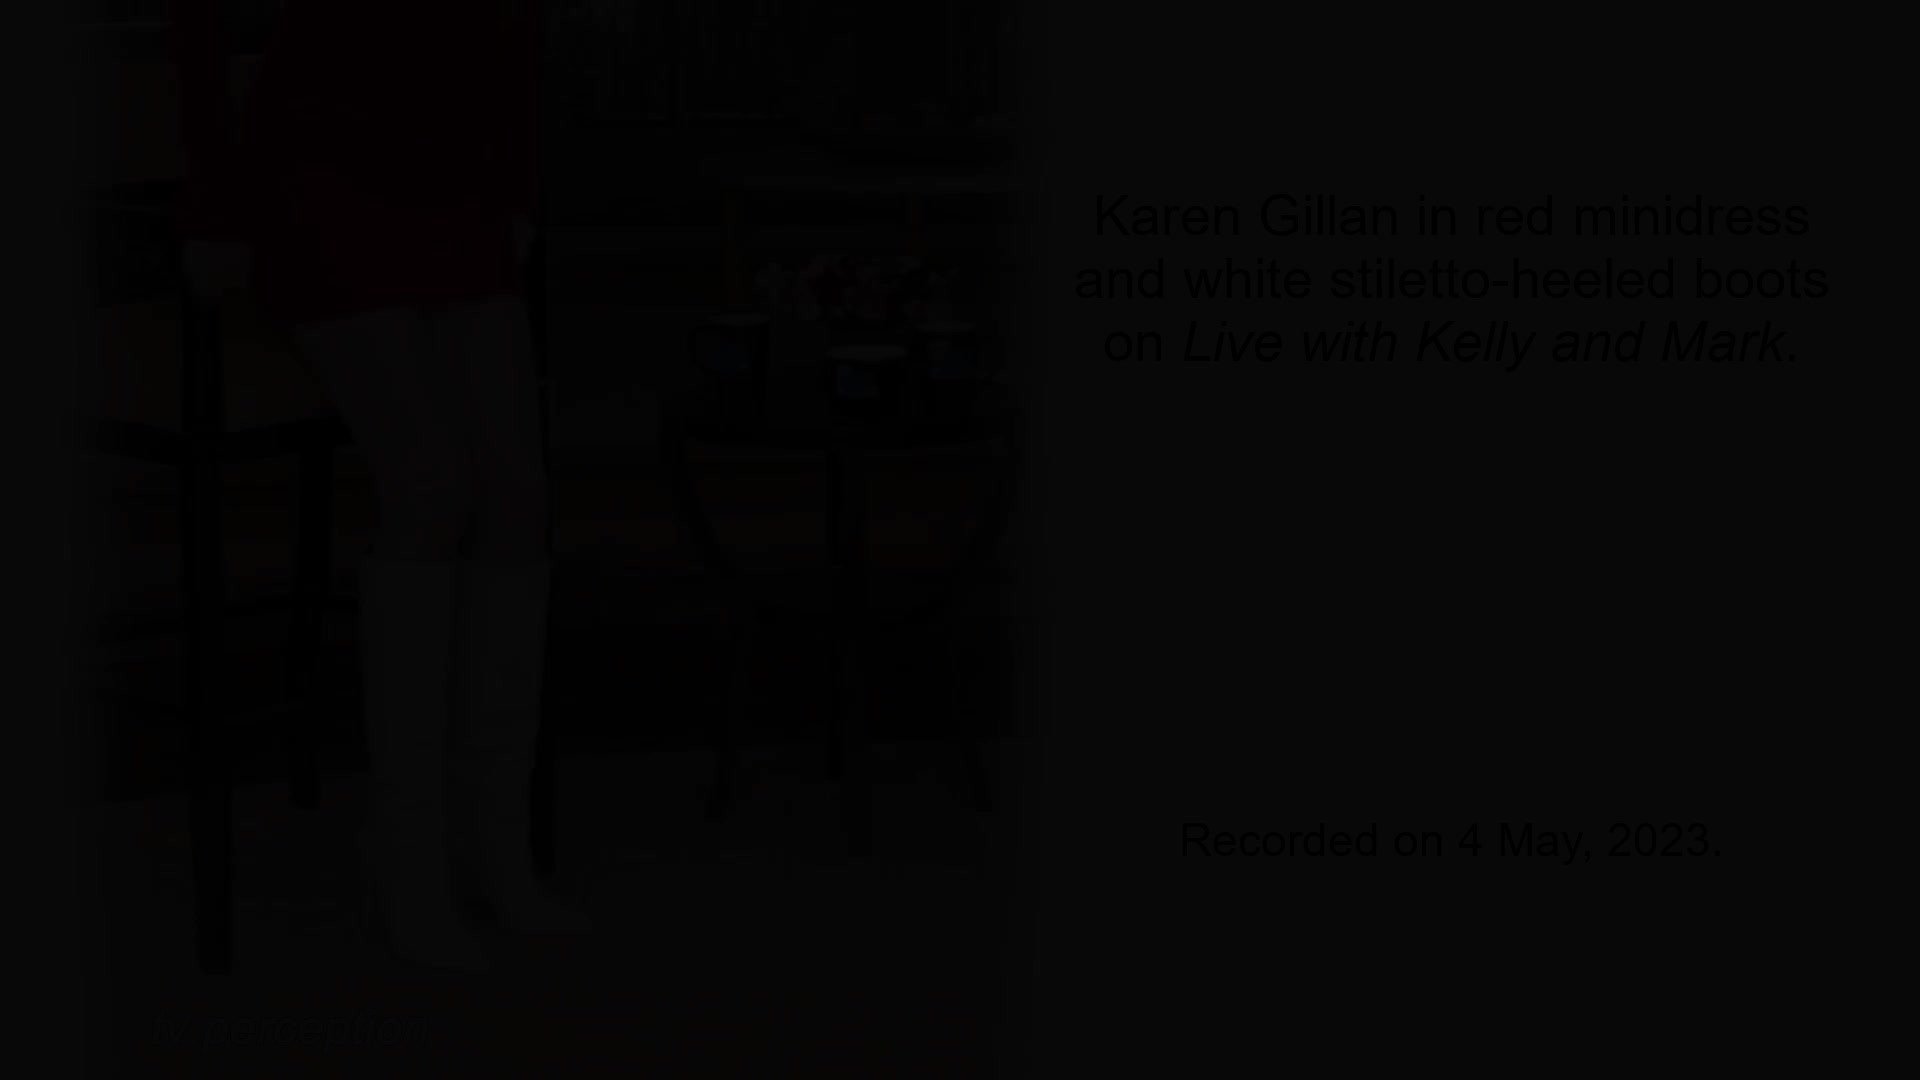 Watch the Video by tv.perception with the username @tv.perception, posted on October 12, 2023. The post is about the topic Celebrity Feet and Legs. and the text says 'Karen Gillan in red minidress and white stiletto-heeled boots on Live with Kelly and Mark.

Recorded on 4 May, 2023.

#KarenGillan #Celebrity #Legs'